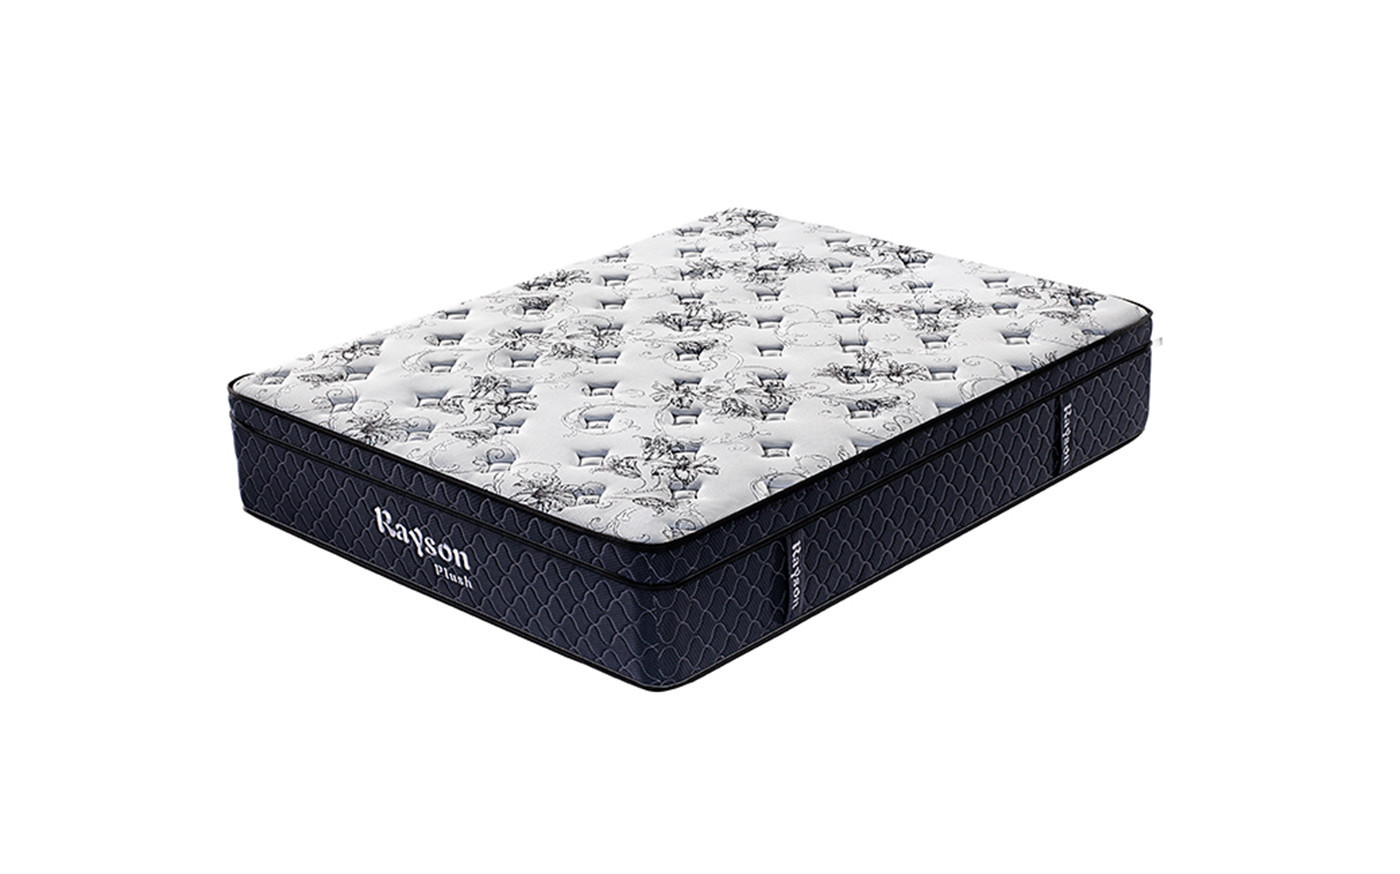 Synwin top quality hotel type mattress hotel room